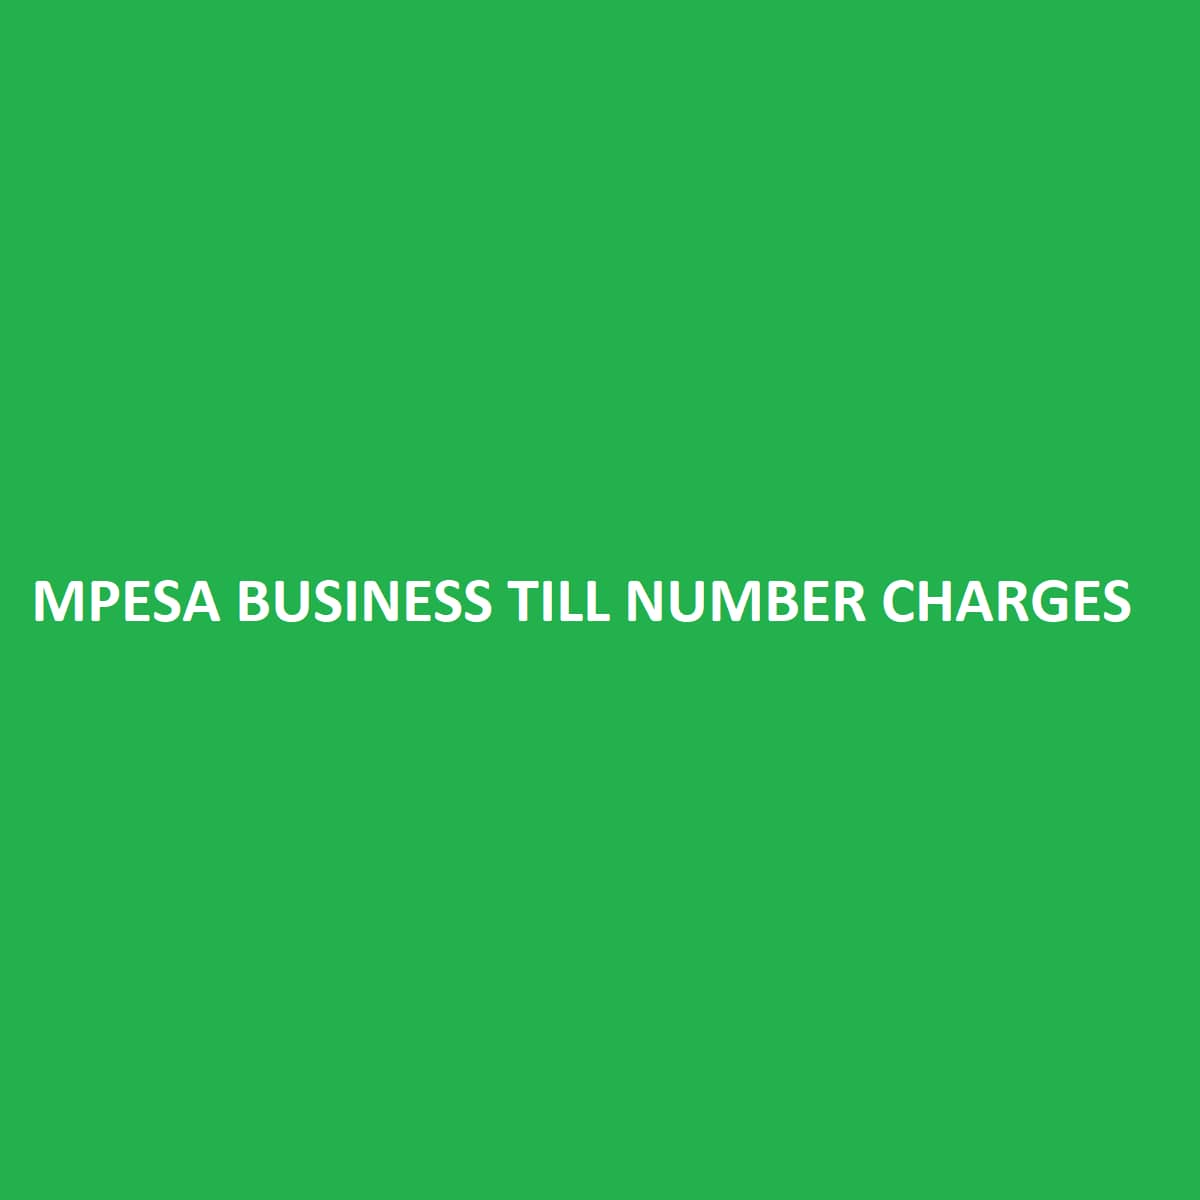 Mpesa Till Number Charges